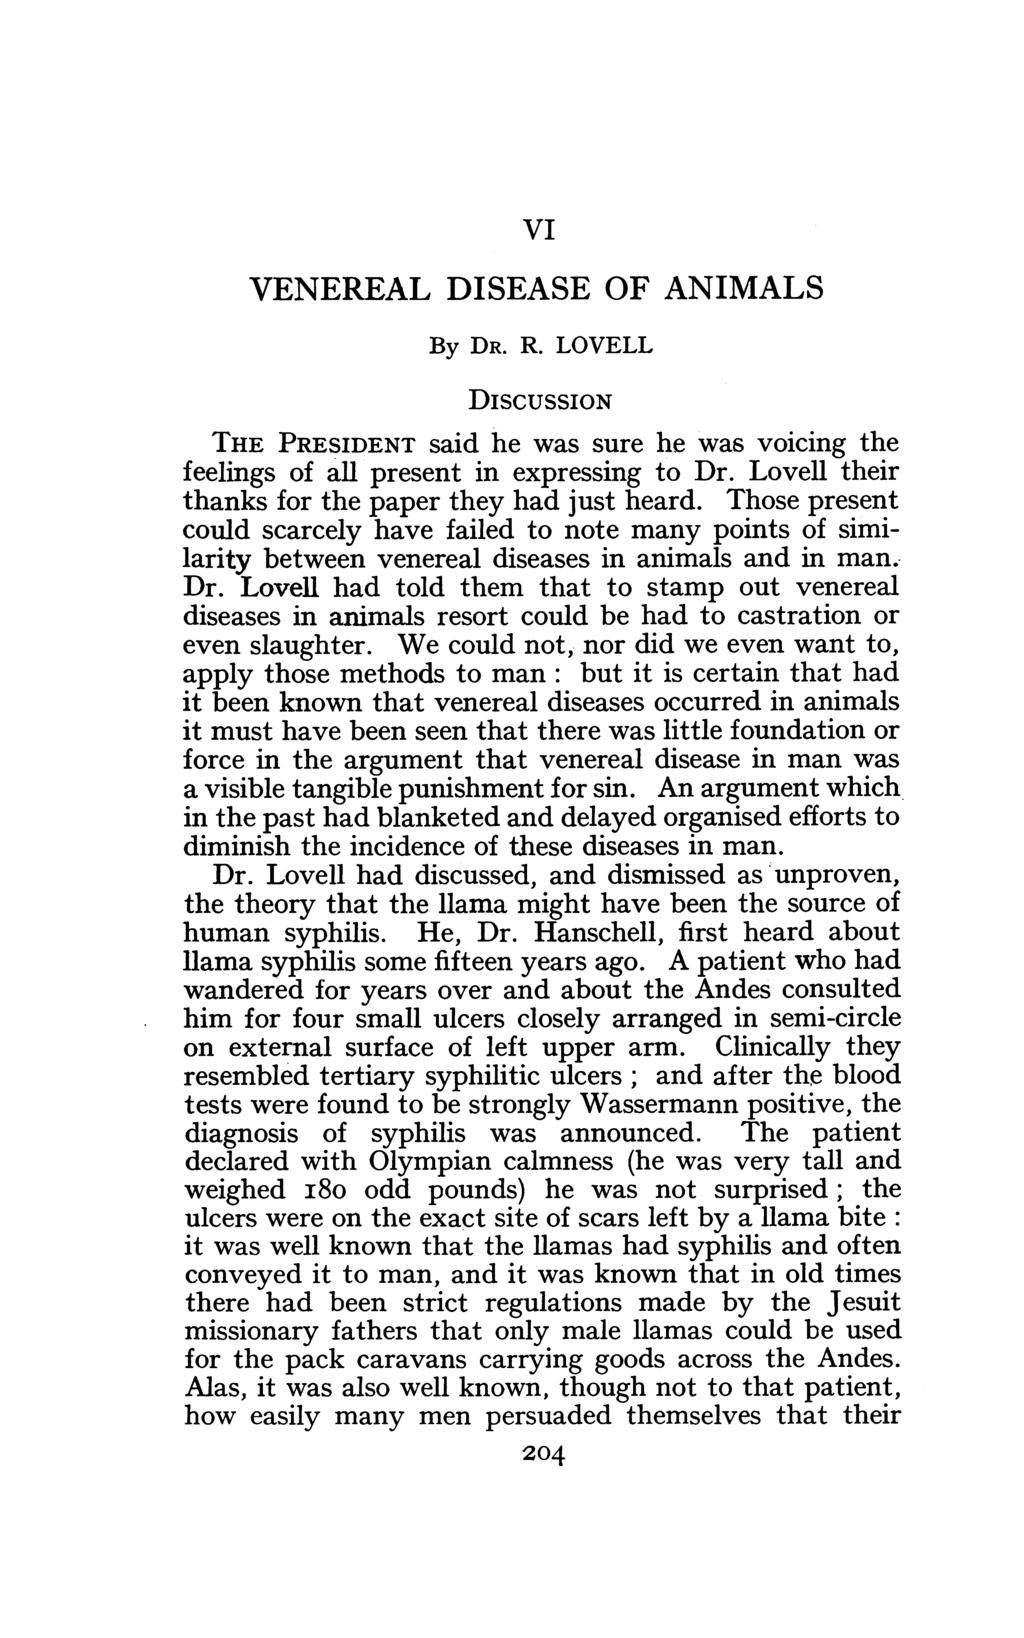 VI VENEREAL DISEASE OF ANIMALS By DR. R. LOVELL DISCUSSION THE PRESIDENT said he was sure he was voicing the feelings of all present in expressing to Dr.